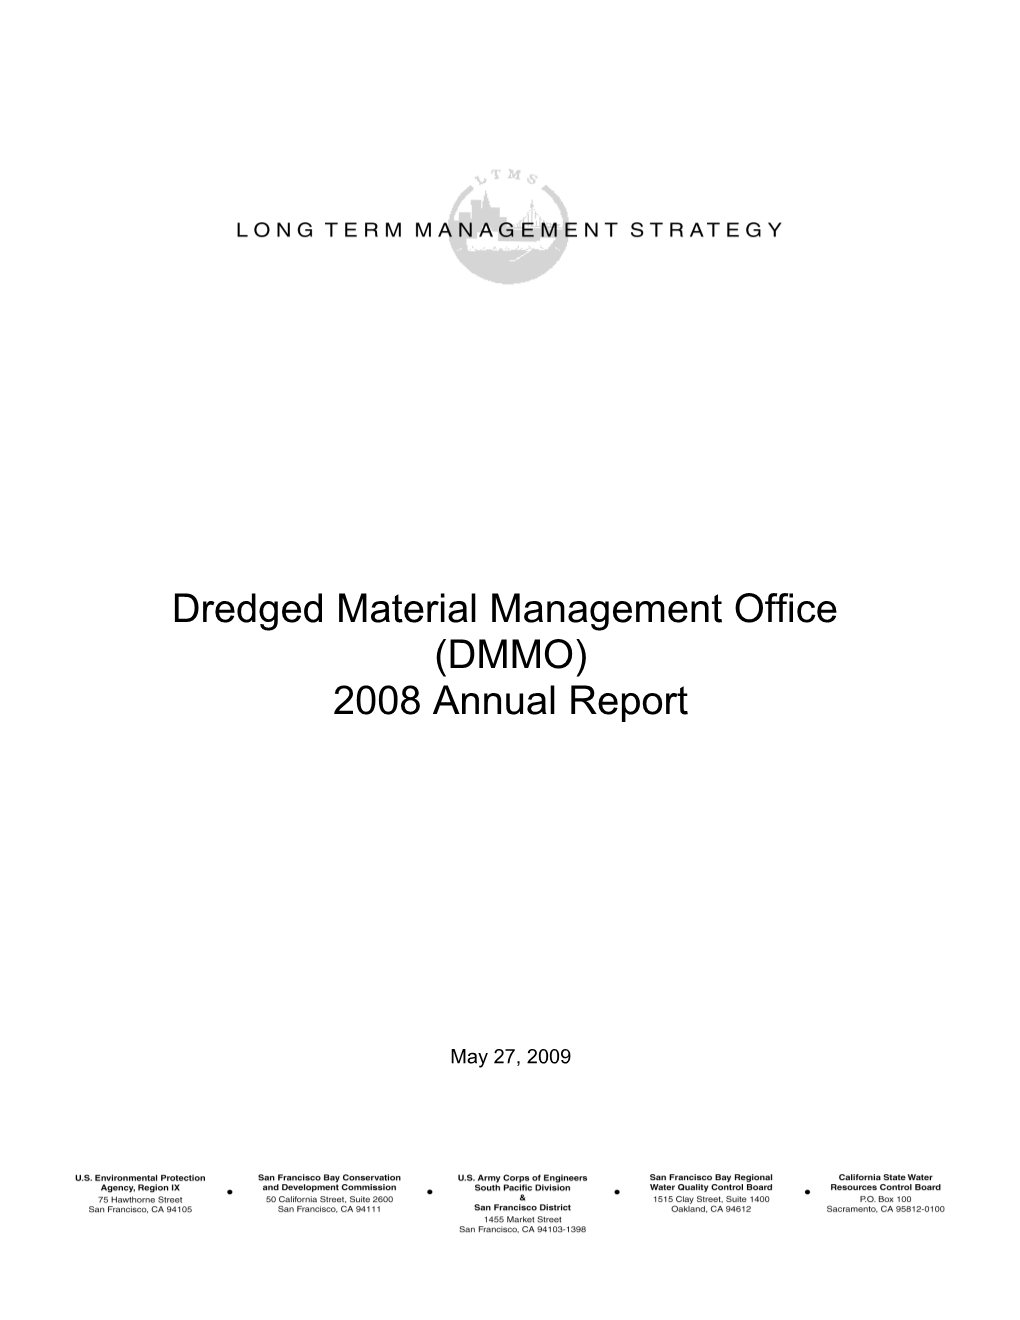 DMMO 2007 Annual Report